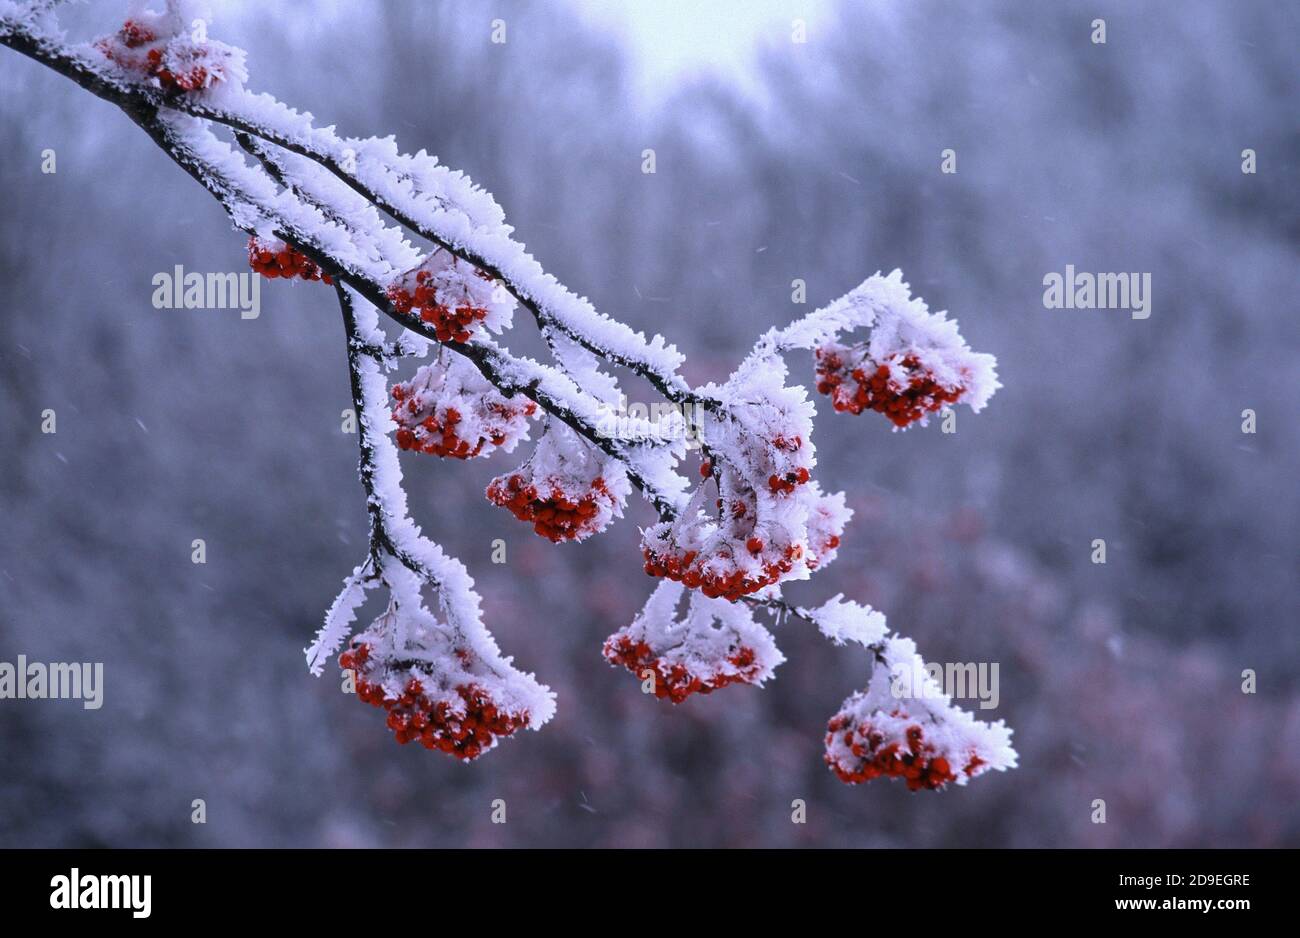 ashberry on a snowy tree branch Stock Photo